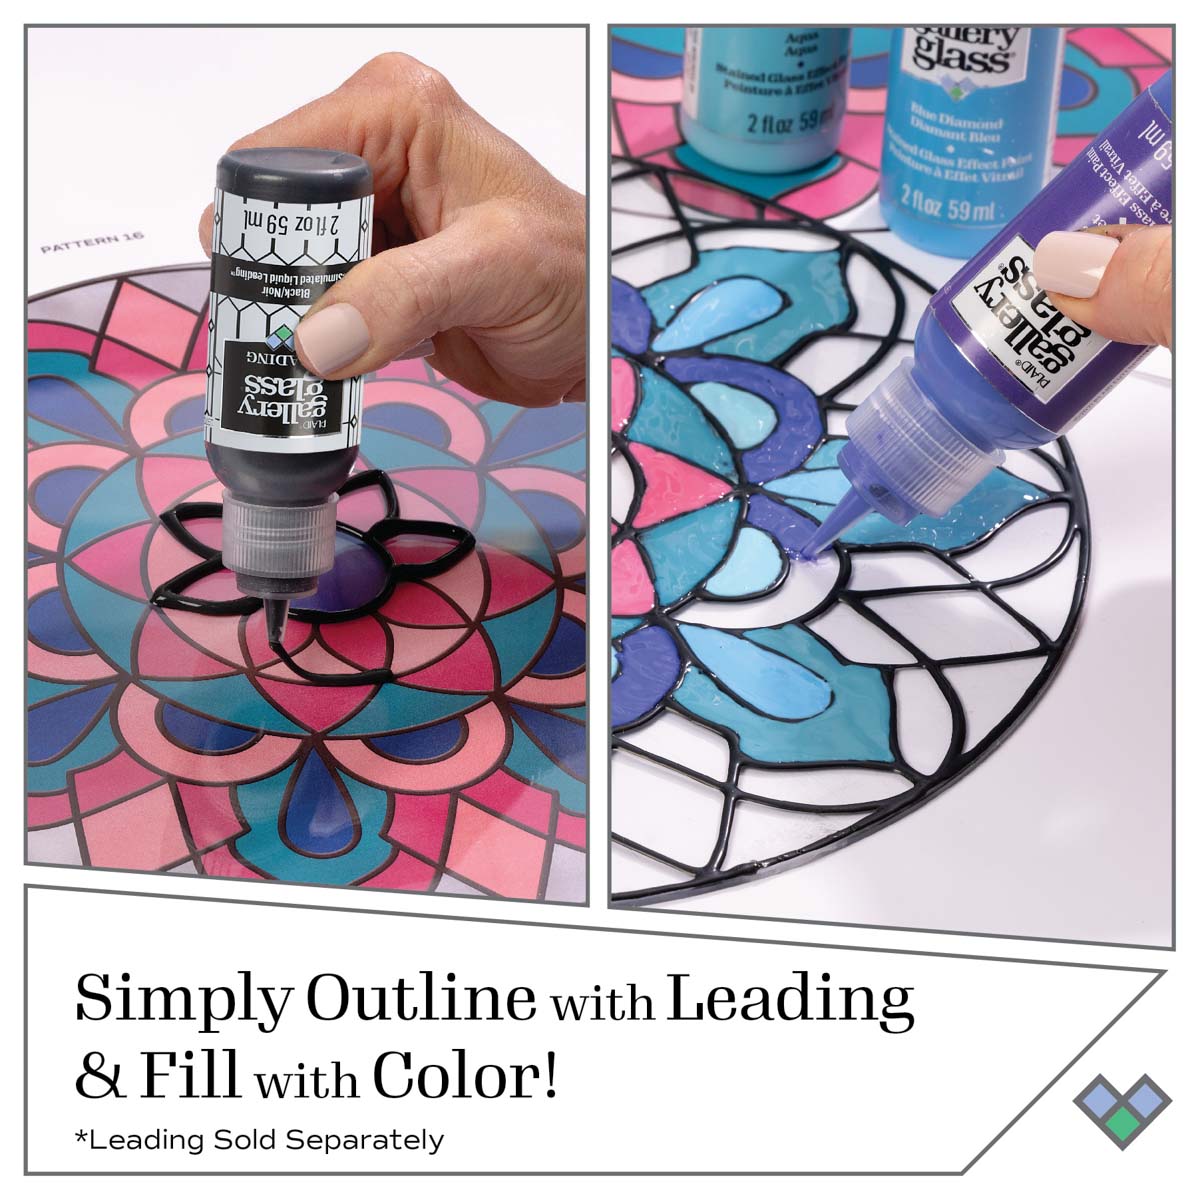 Gallery Glass ® Stained Glass Effect Paint - Blue Bird, 2 oz. - 19705